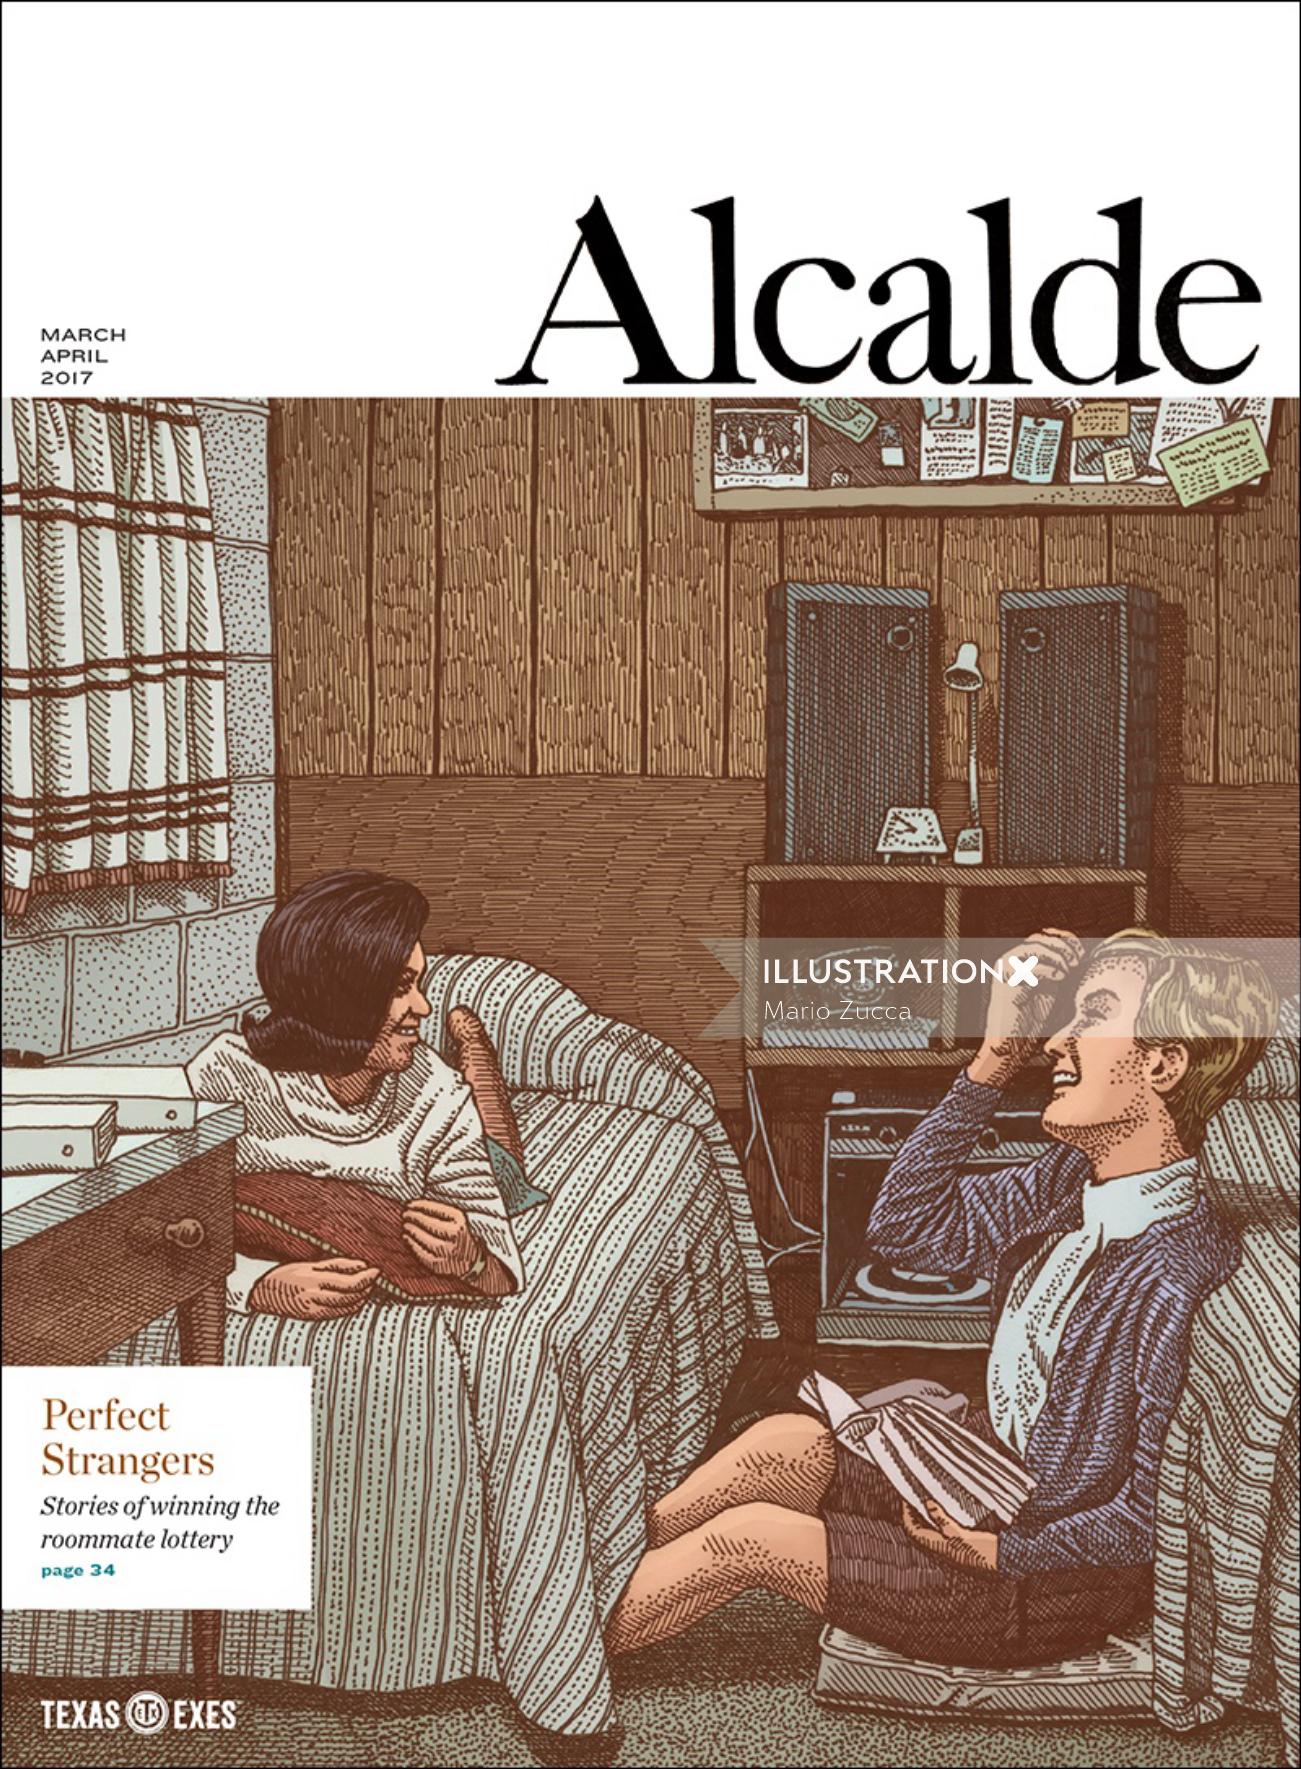 Cover page illustration of Perfect strangers for The Alcalde magazine